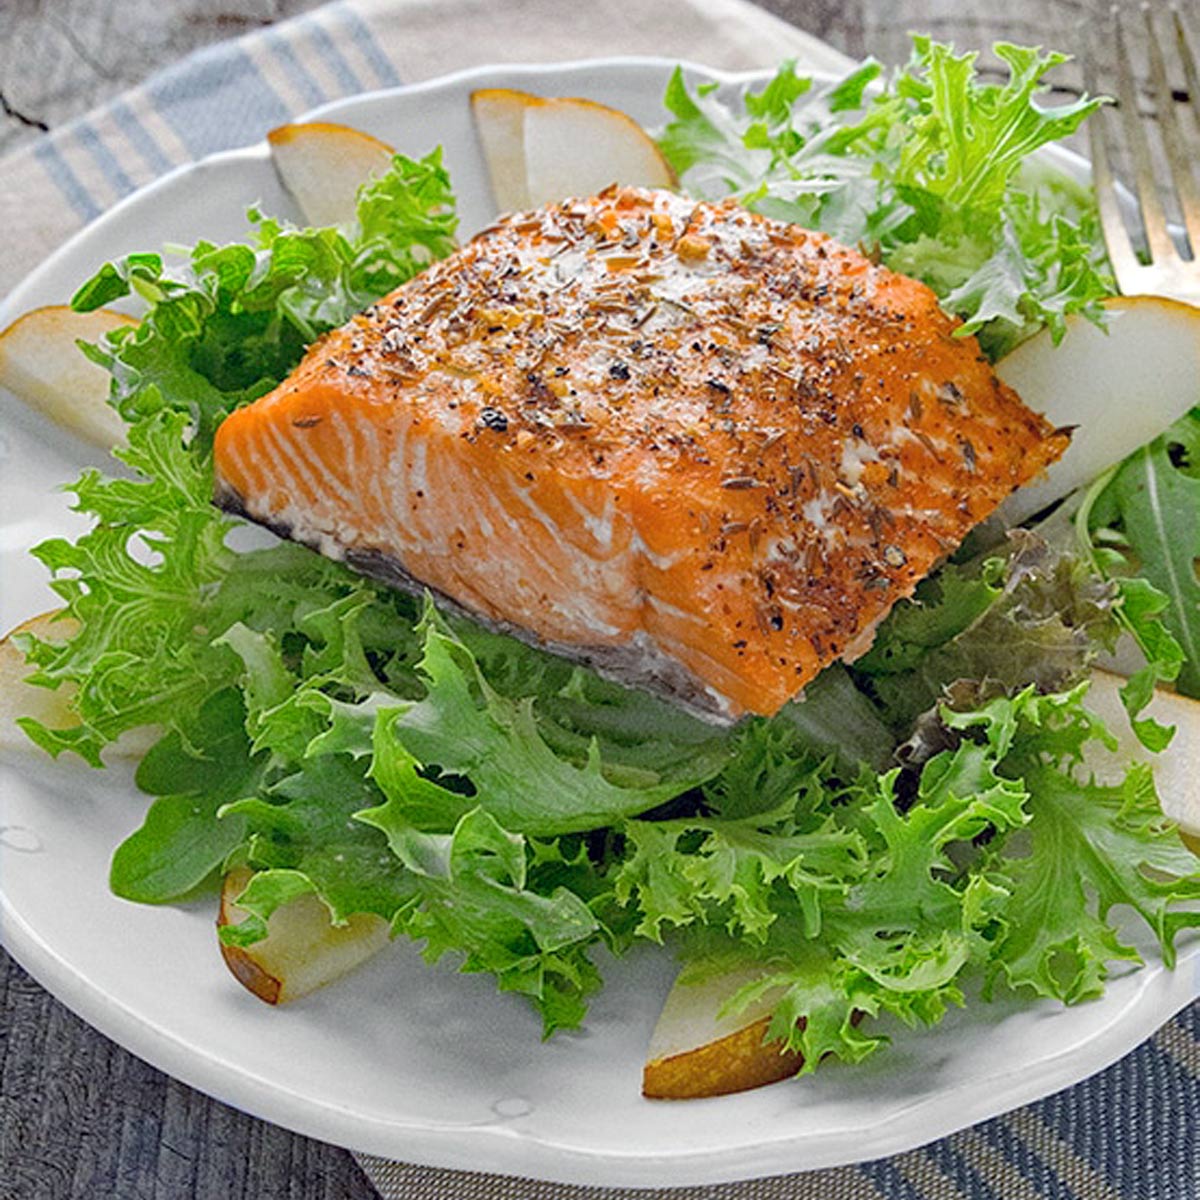 Steelhead on a bed of lettuce with sliced pears.